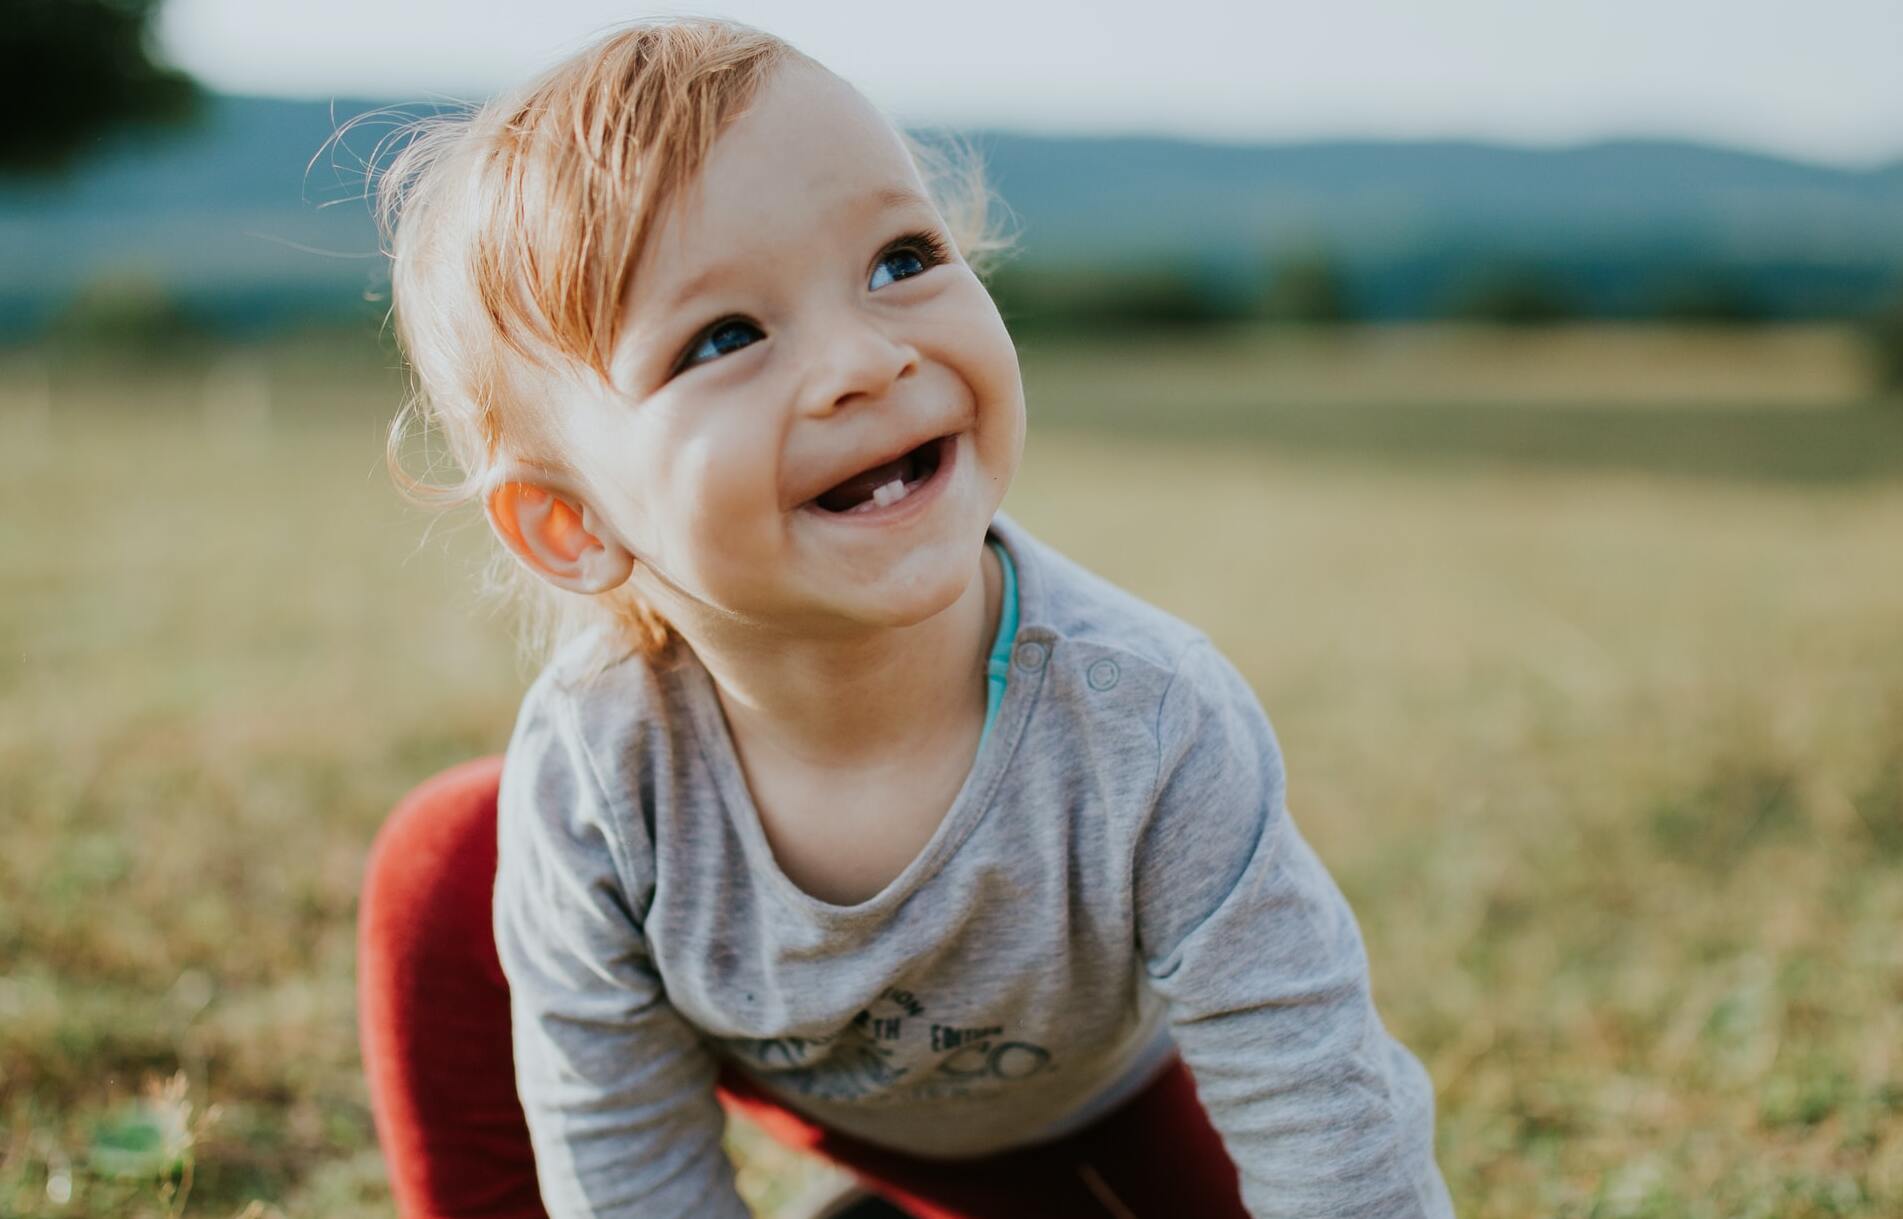 alvin mahmudov D3H1opzzq68 unsplash1 - How to Pull a Baby Tooth